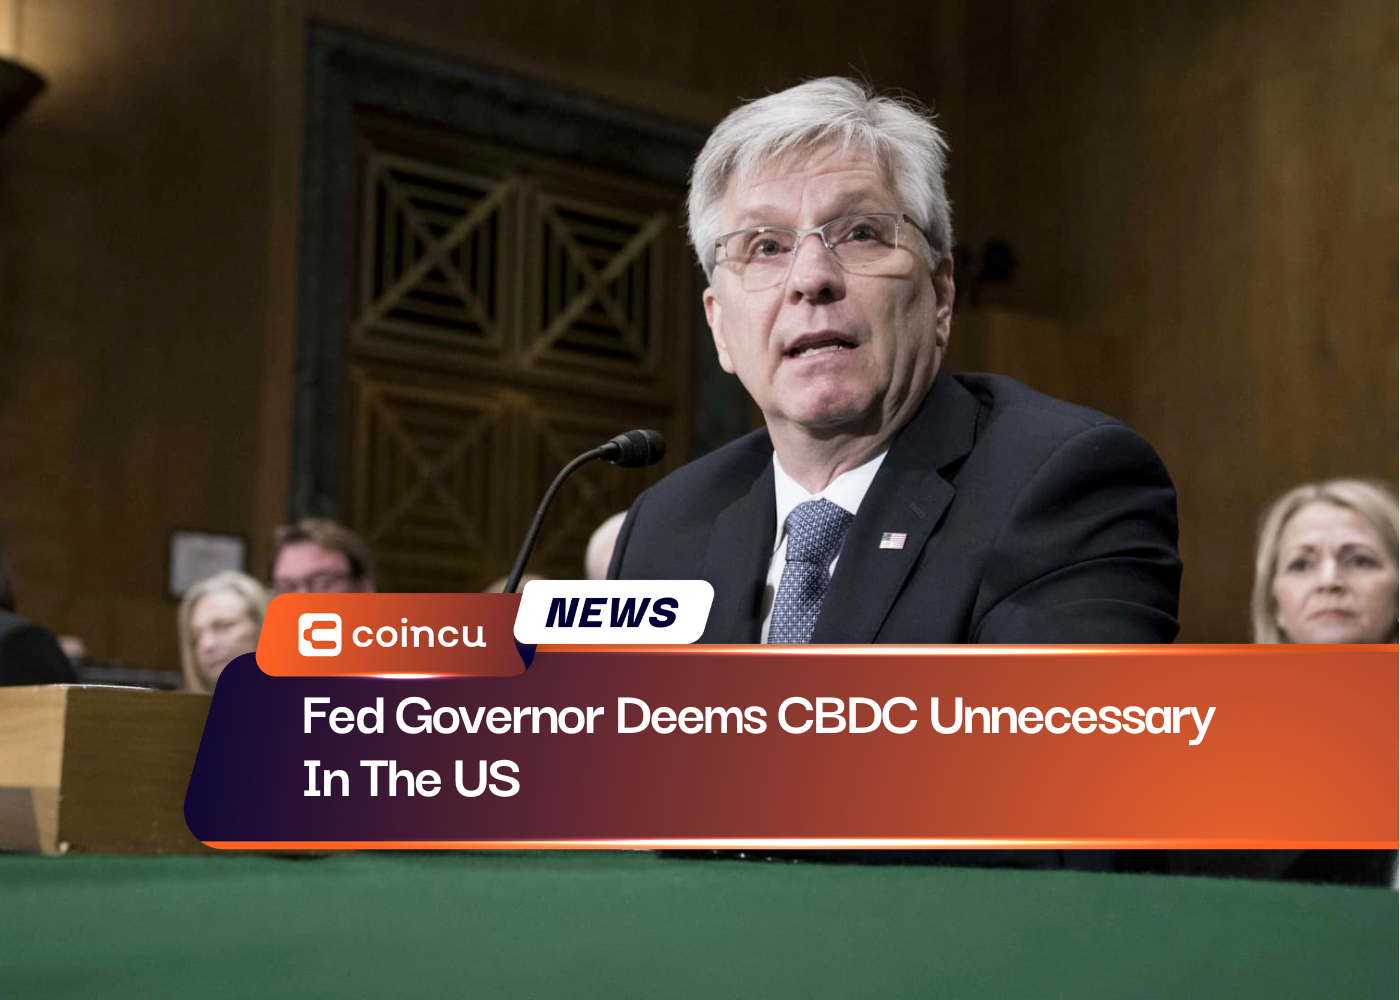 Fed Governor Deems CBDC Unnecessary In The US